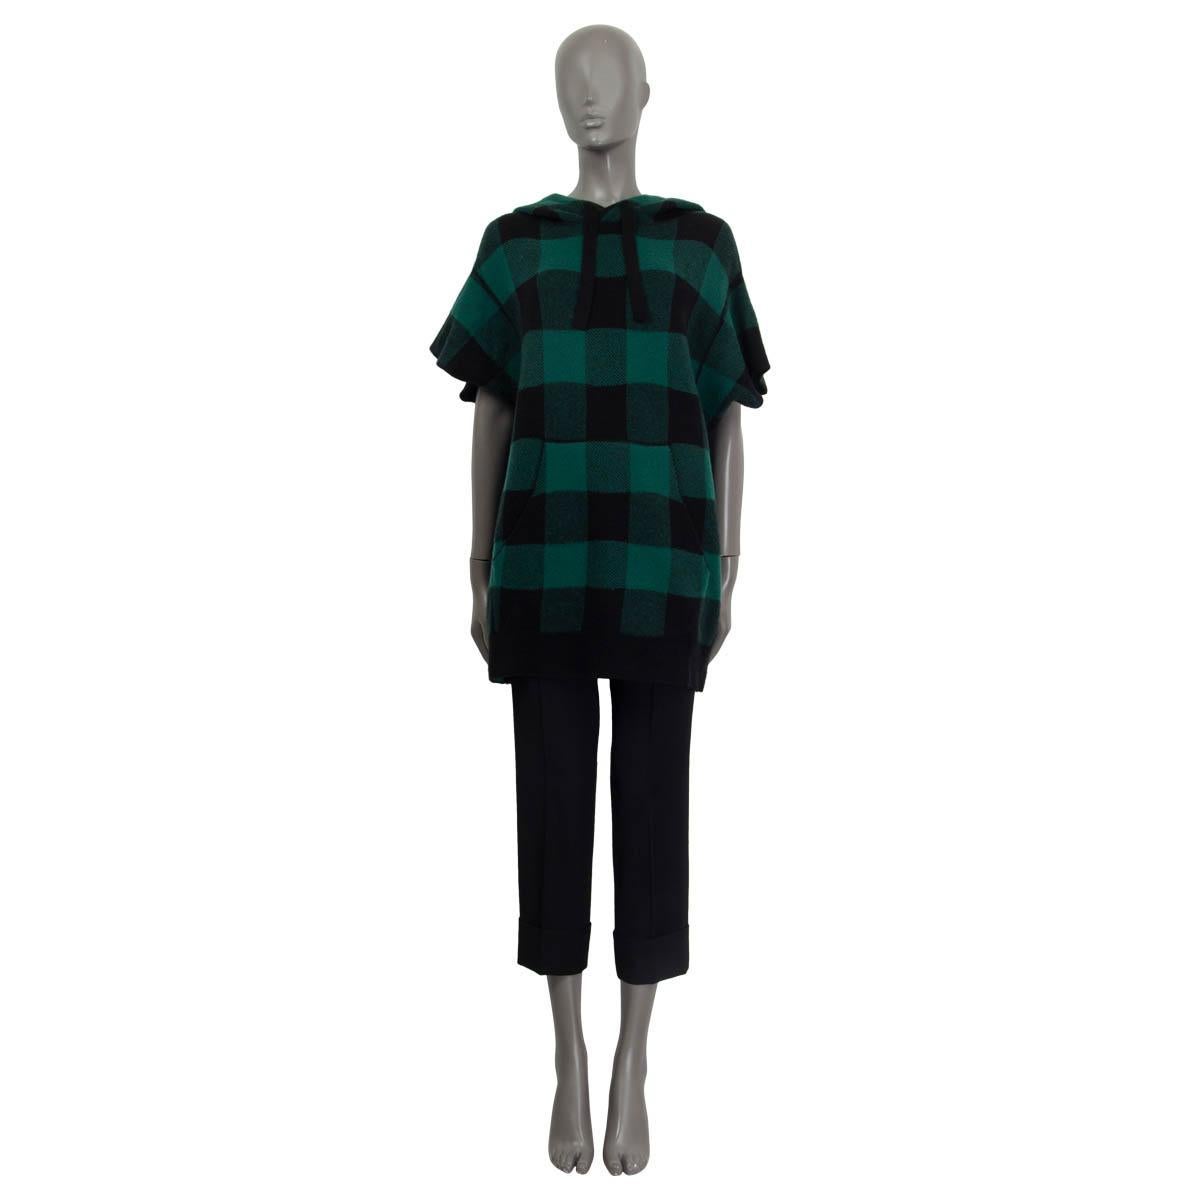 100% authentic Christian Dior 2019 J'Adior 8 hooded plaid sweater in green and black cashmere (96%), polyamide (3%) and elastane (1%). Features short sleeves, a front pocket and tie accents at the neck. Unlined. Has been worn and is in excellent